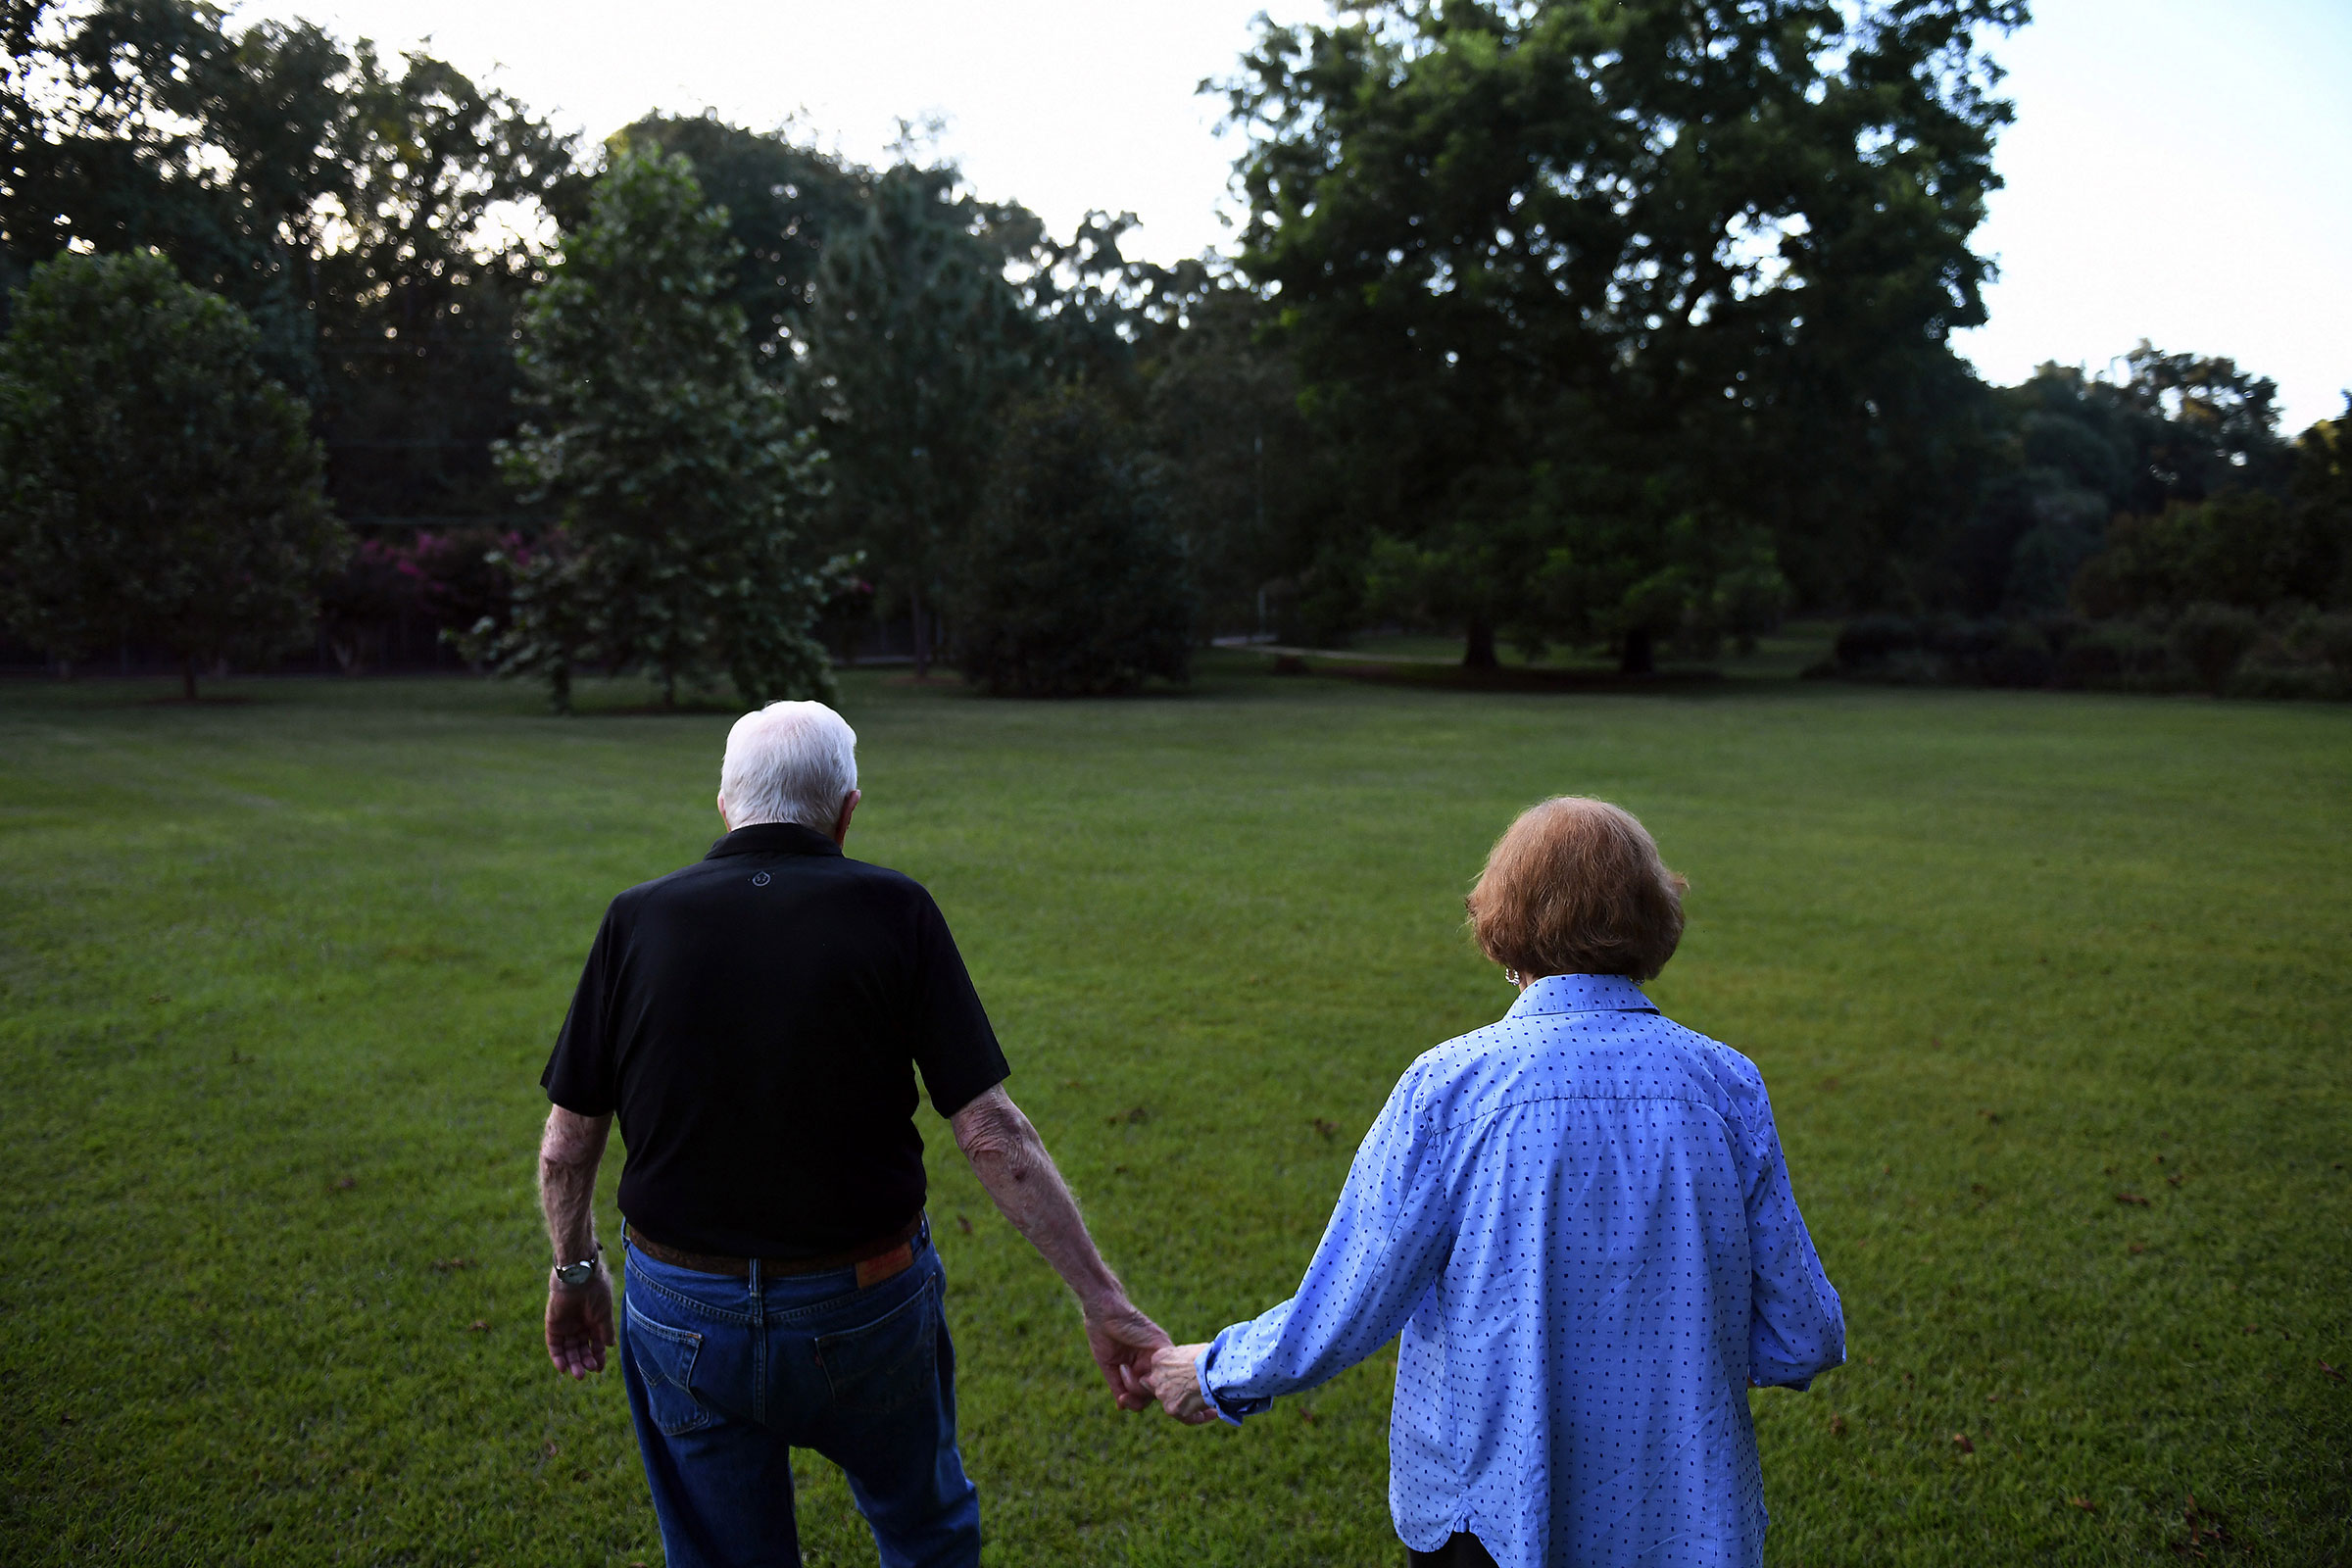 Former President Jimmy Carter walks with his wife, former First Lady, Rosalynn Carter towards their home following dinner at a friend's home in Plains, GA, on Aug. 4, 2018. Born in Plains, GA, President Carter stayed in the town following his presidency. (Matt McClain—The Washington Post/Getty Images)